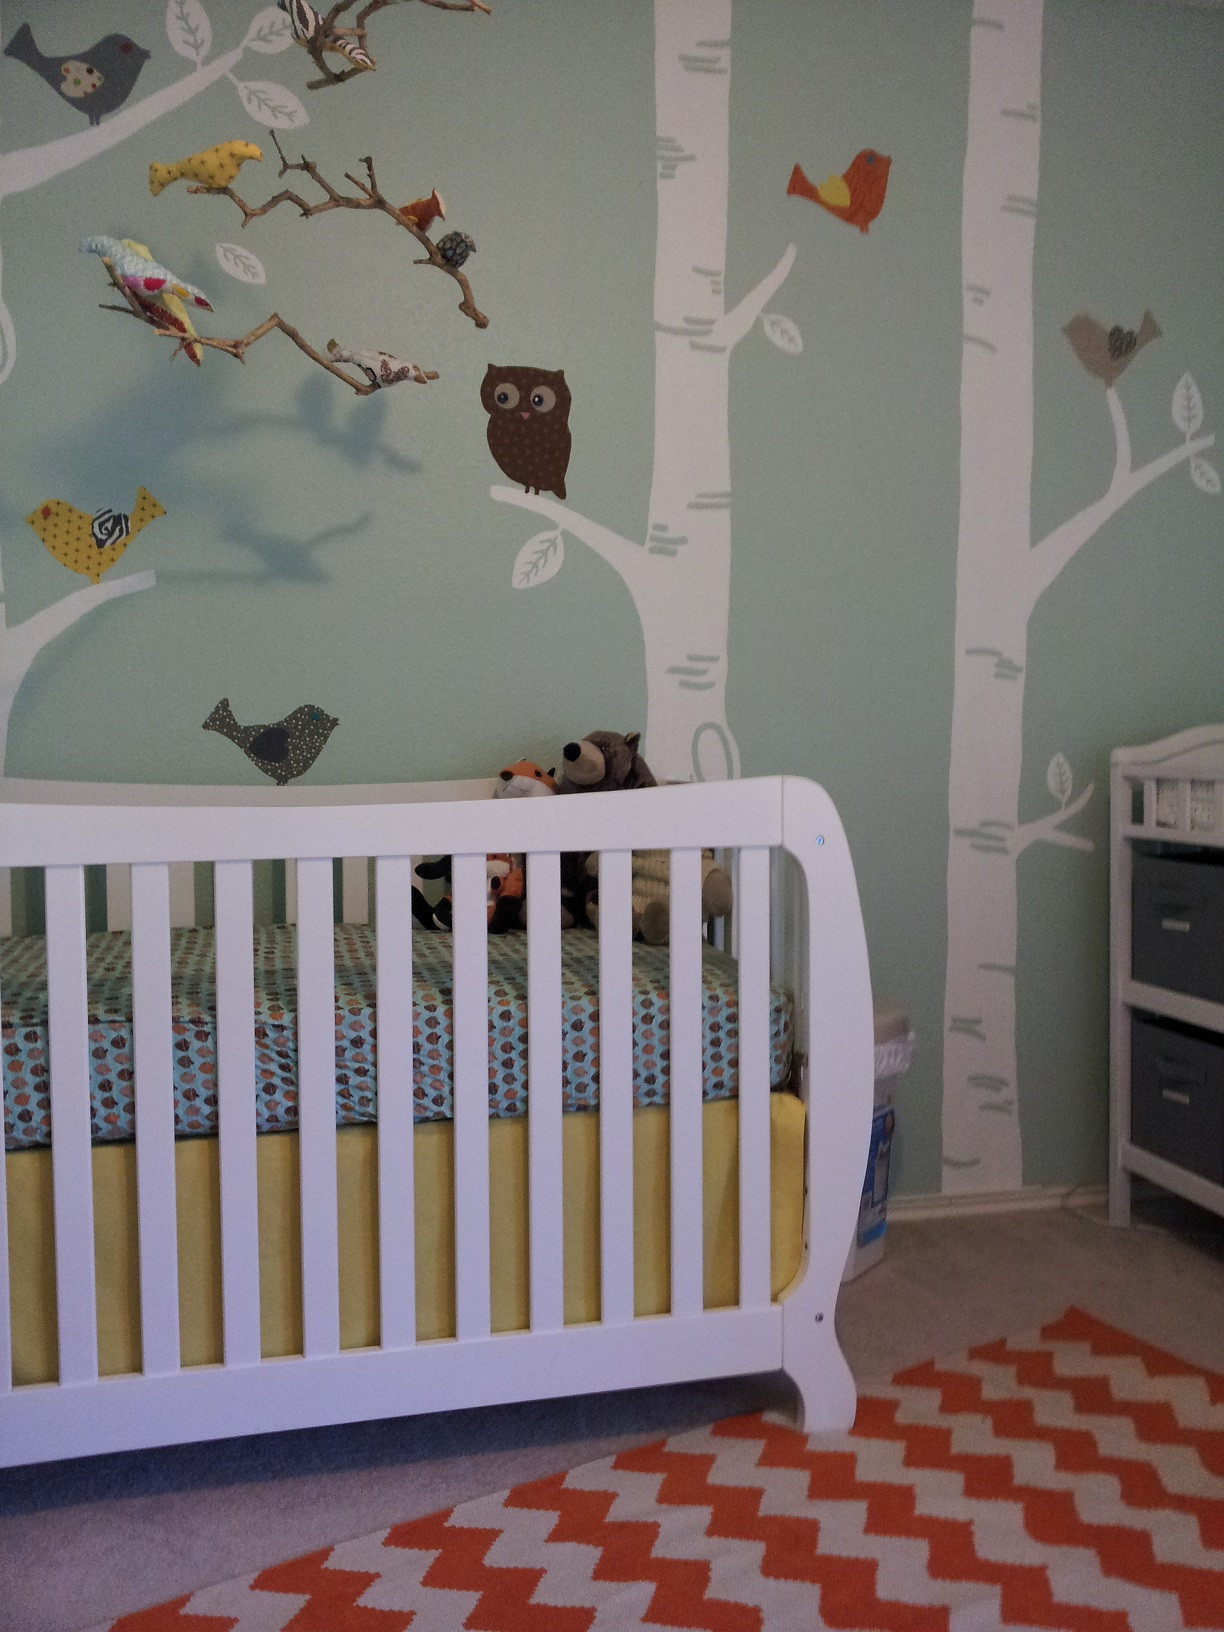 Do It Yourself Baby Nursery Decor
 DIY Nursery with Modern and Vintage Elements Project Nursery